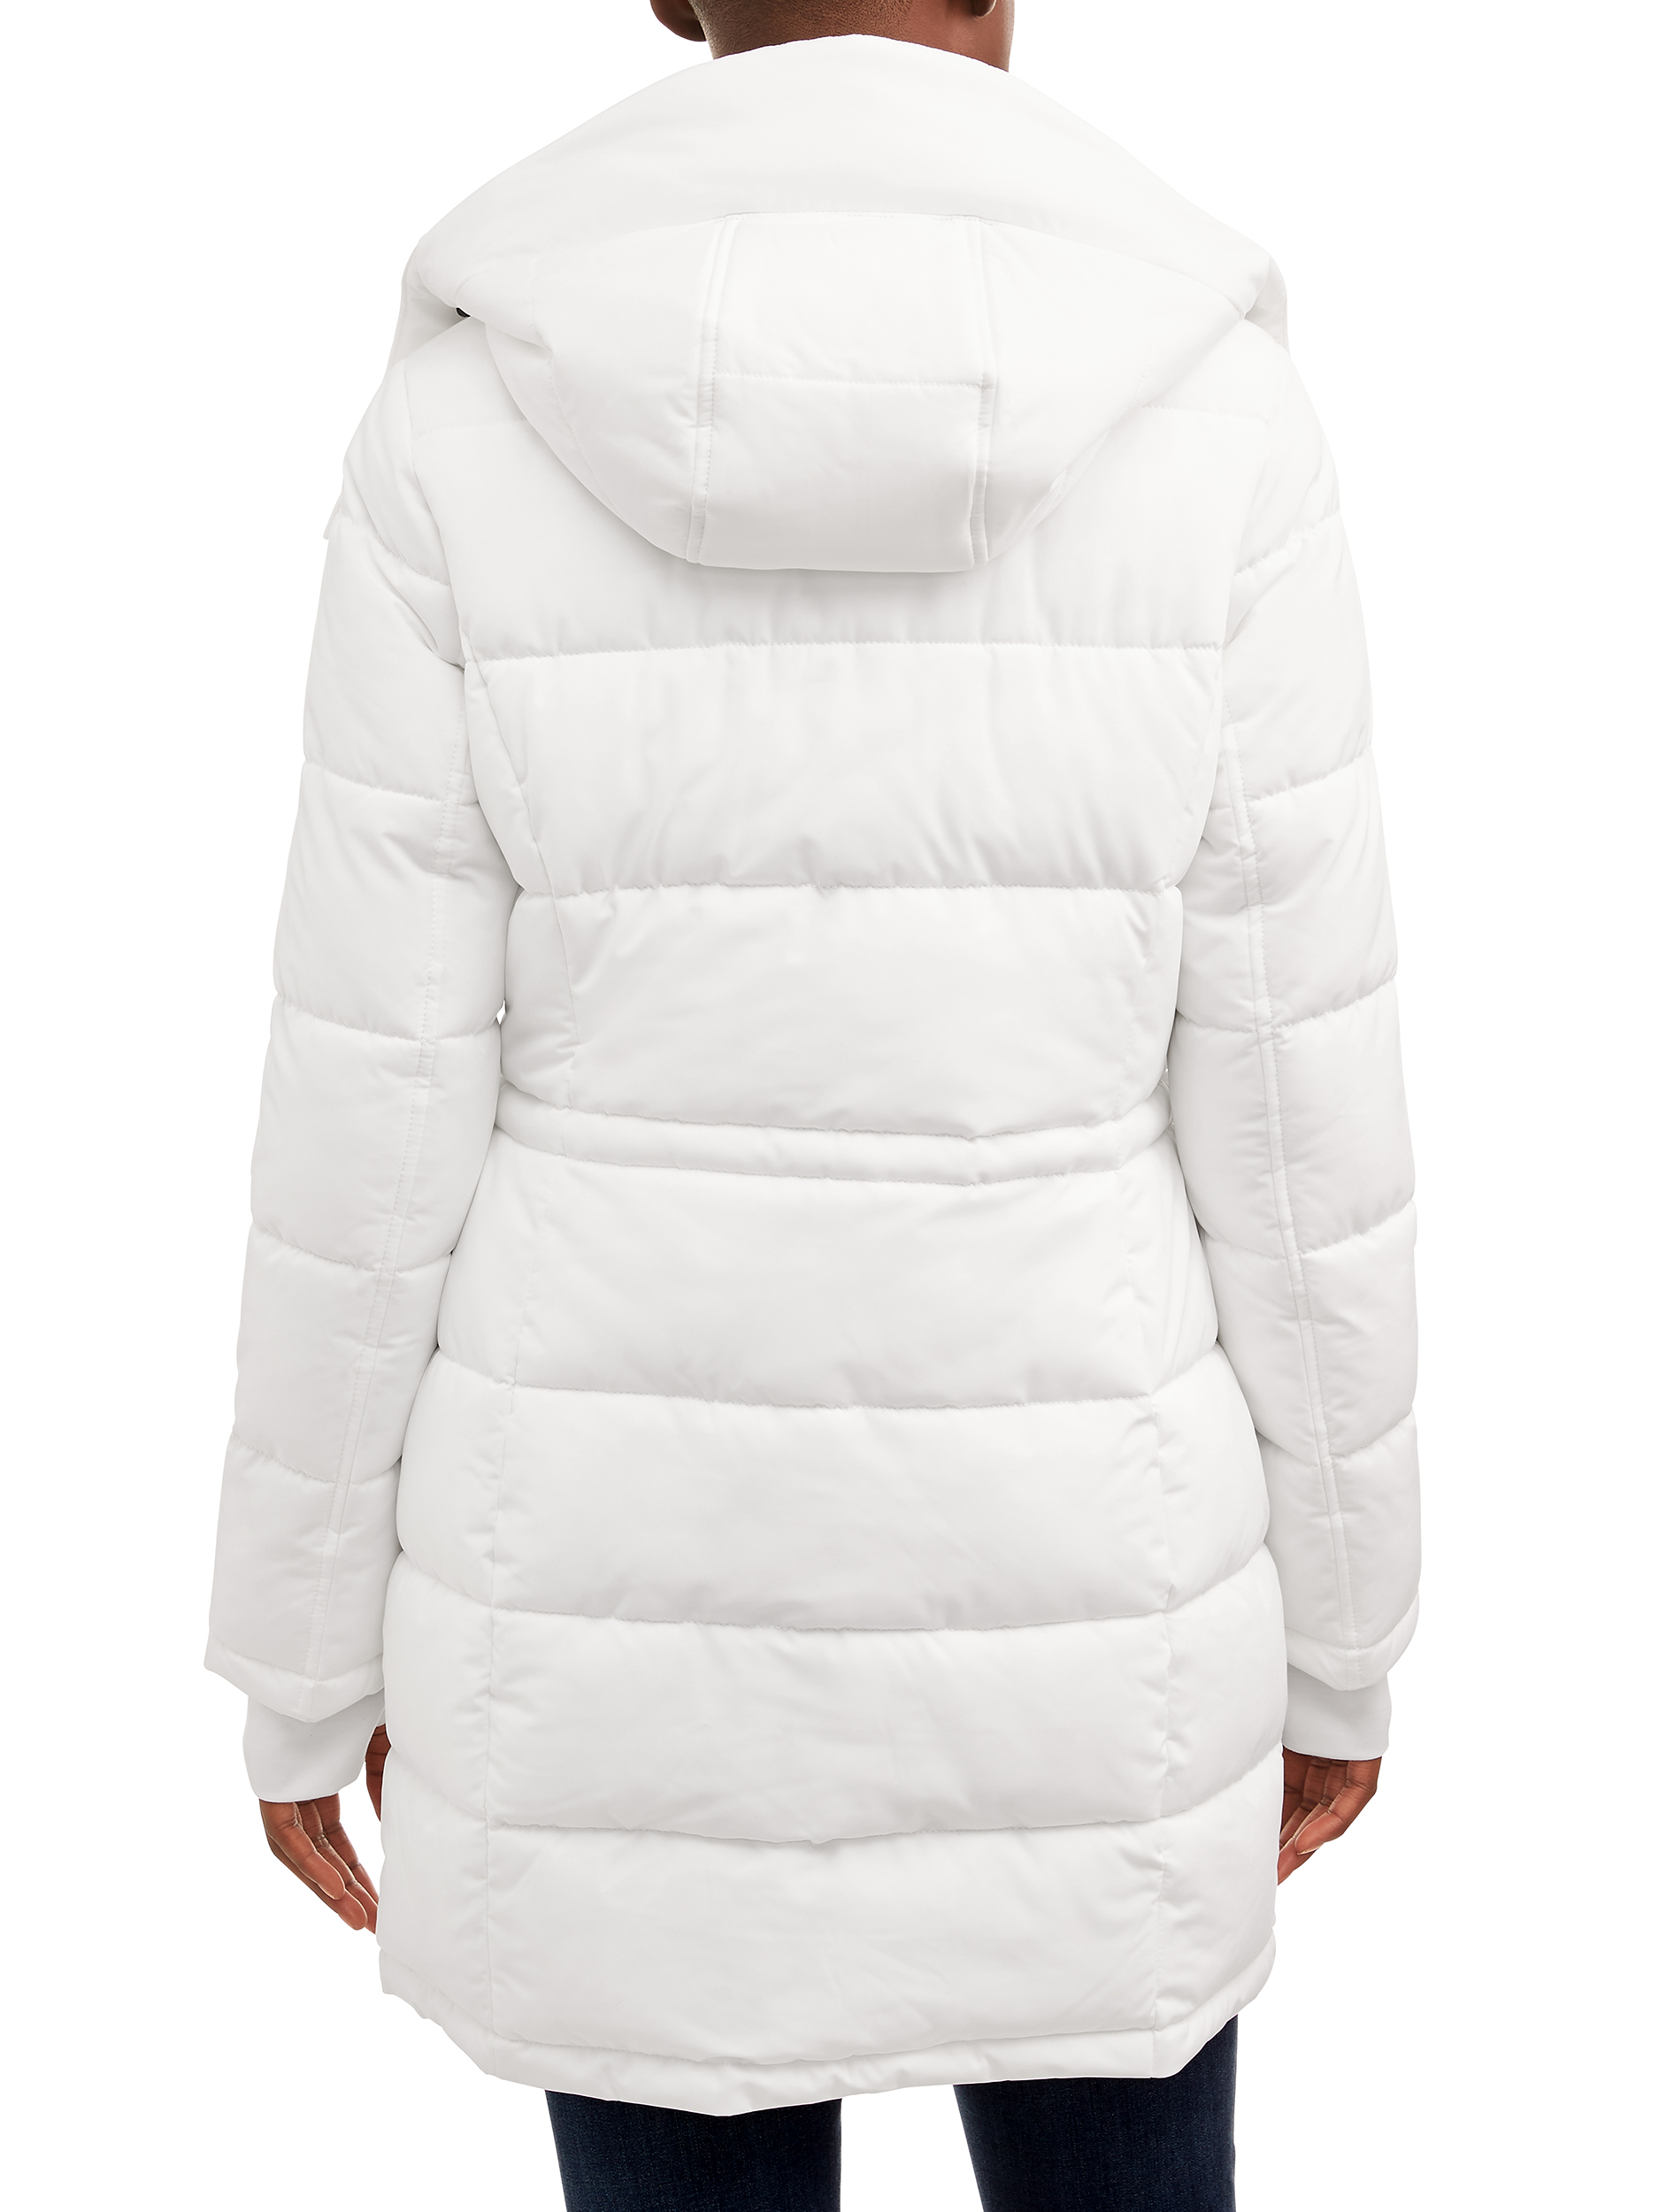 F.O.G. Women's Long Puffer with Snap Front Closure - image 3 of 4